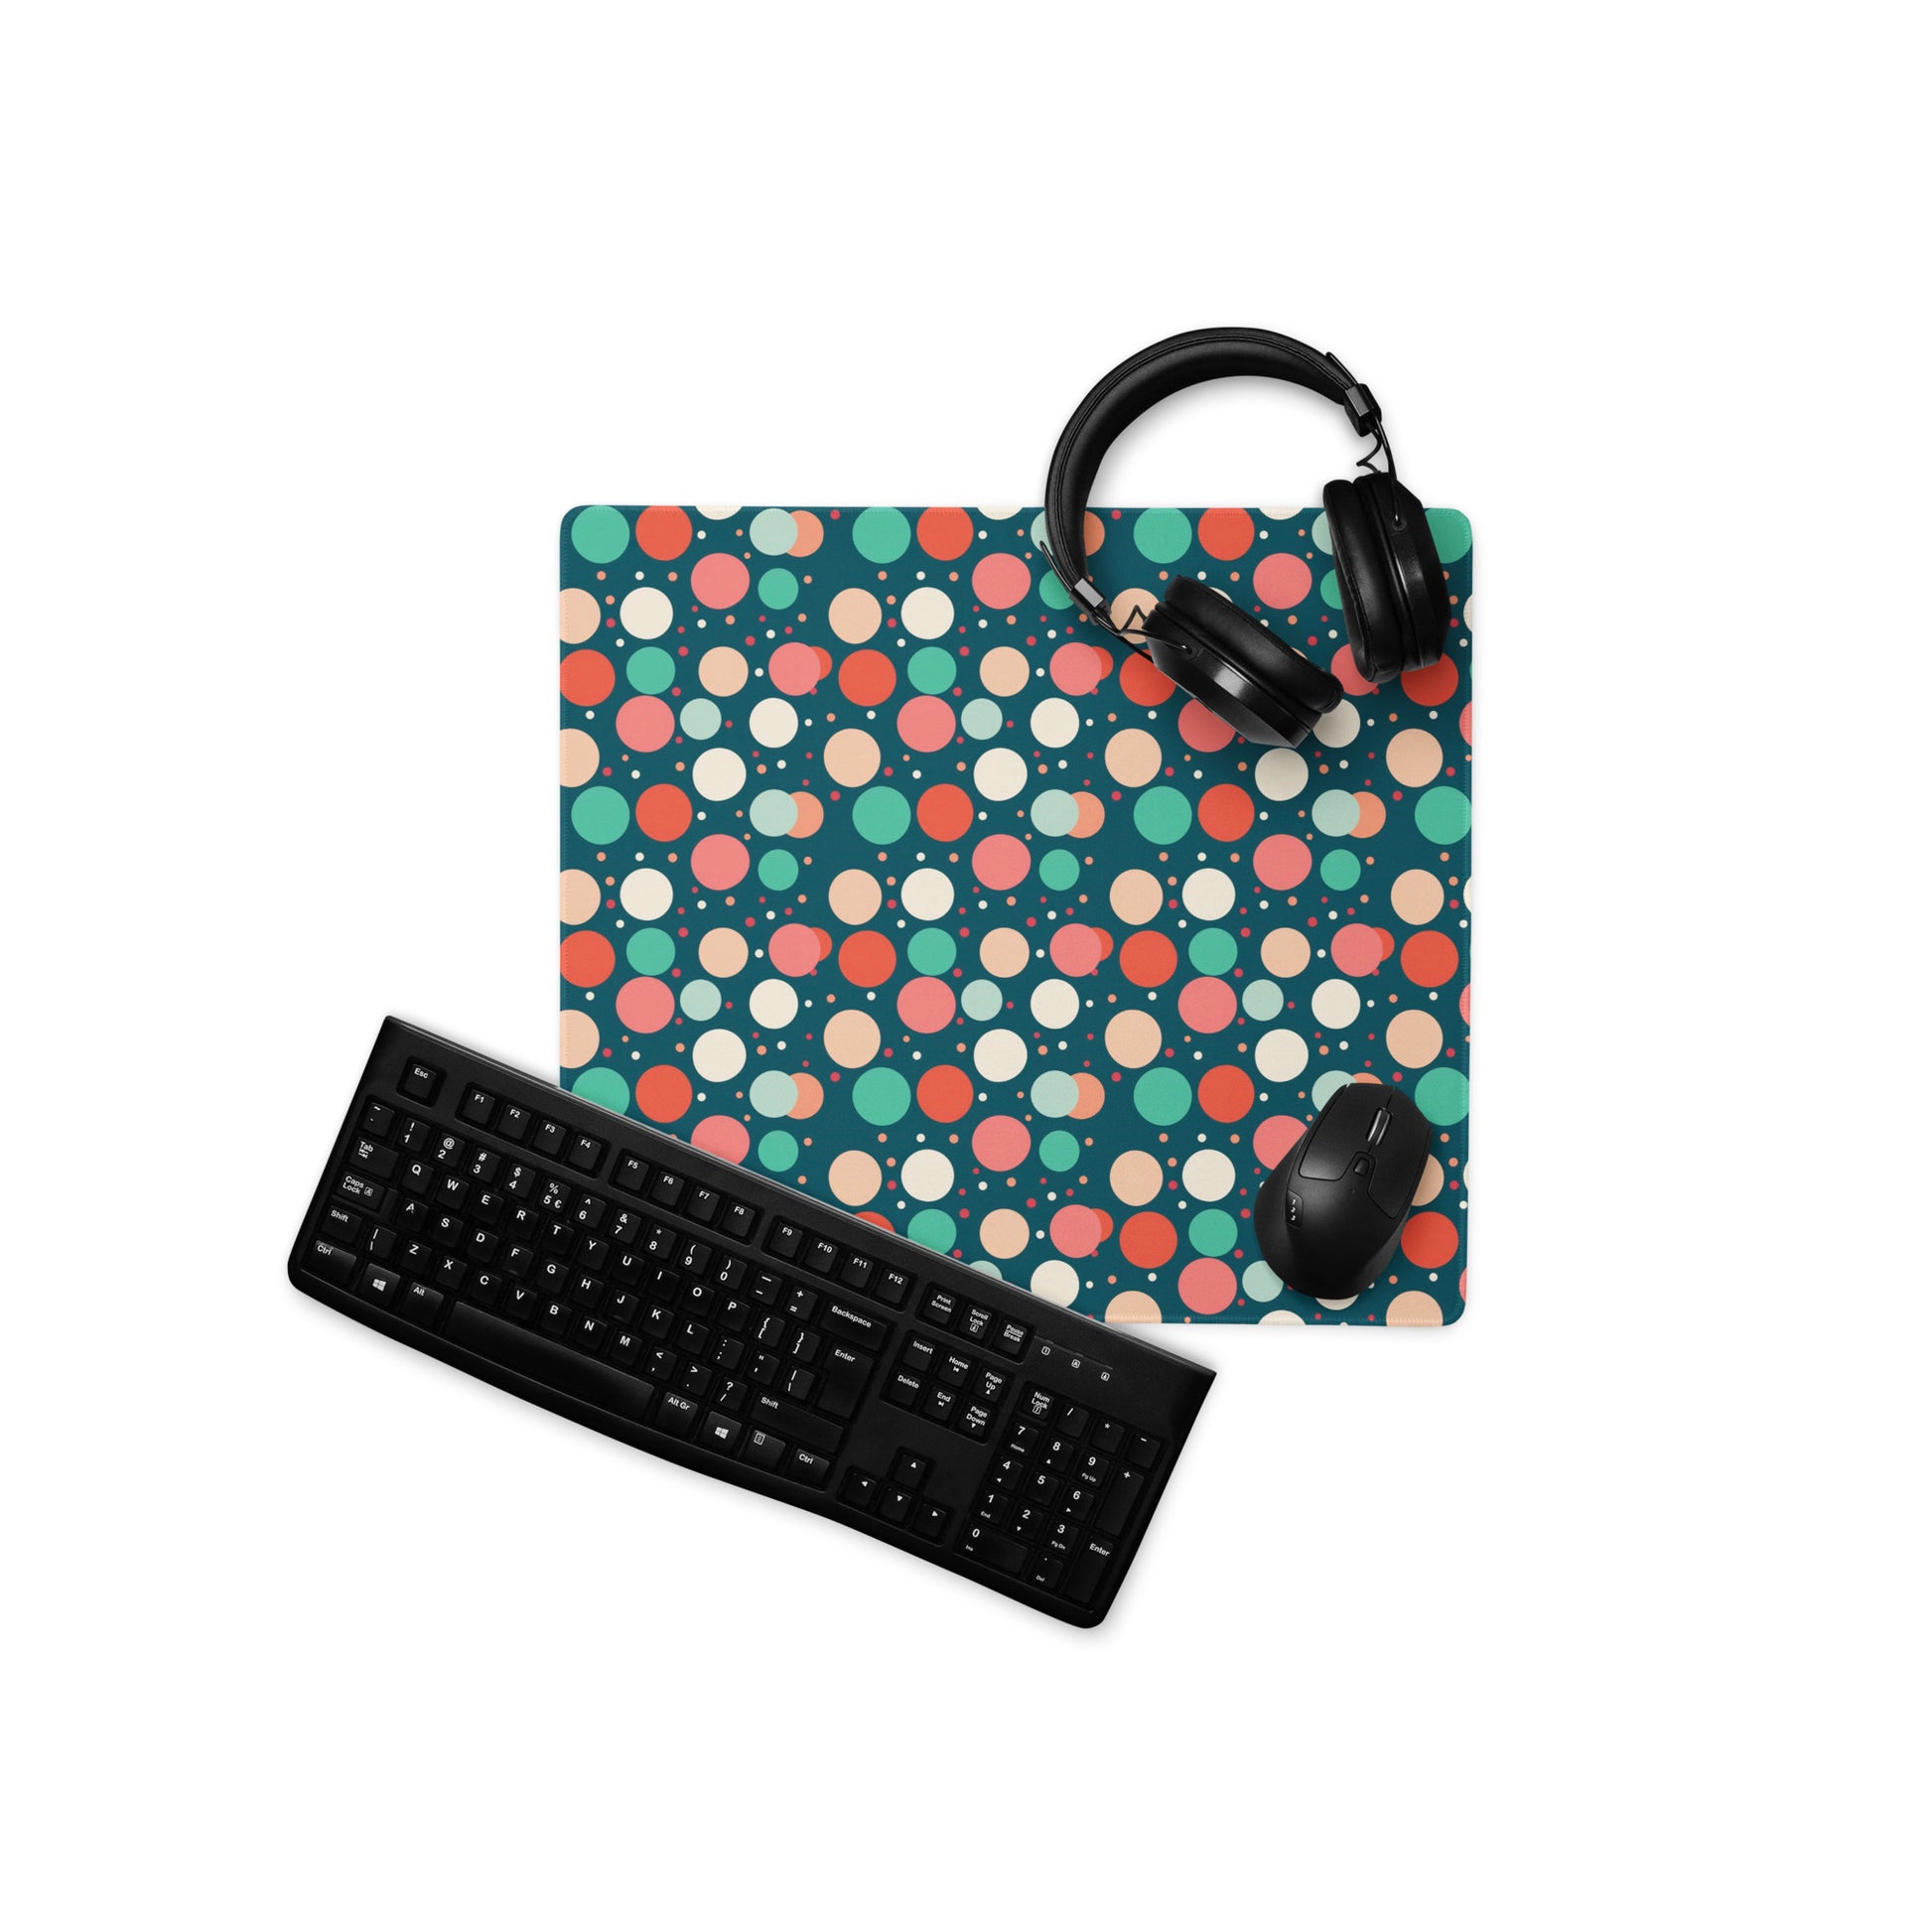  A 18" x 16" desk pad with red teal and yellow polka dot pattern. With a keyboard, mouse, and headphones sitting on it.